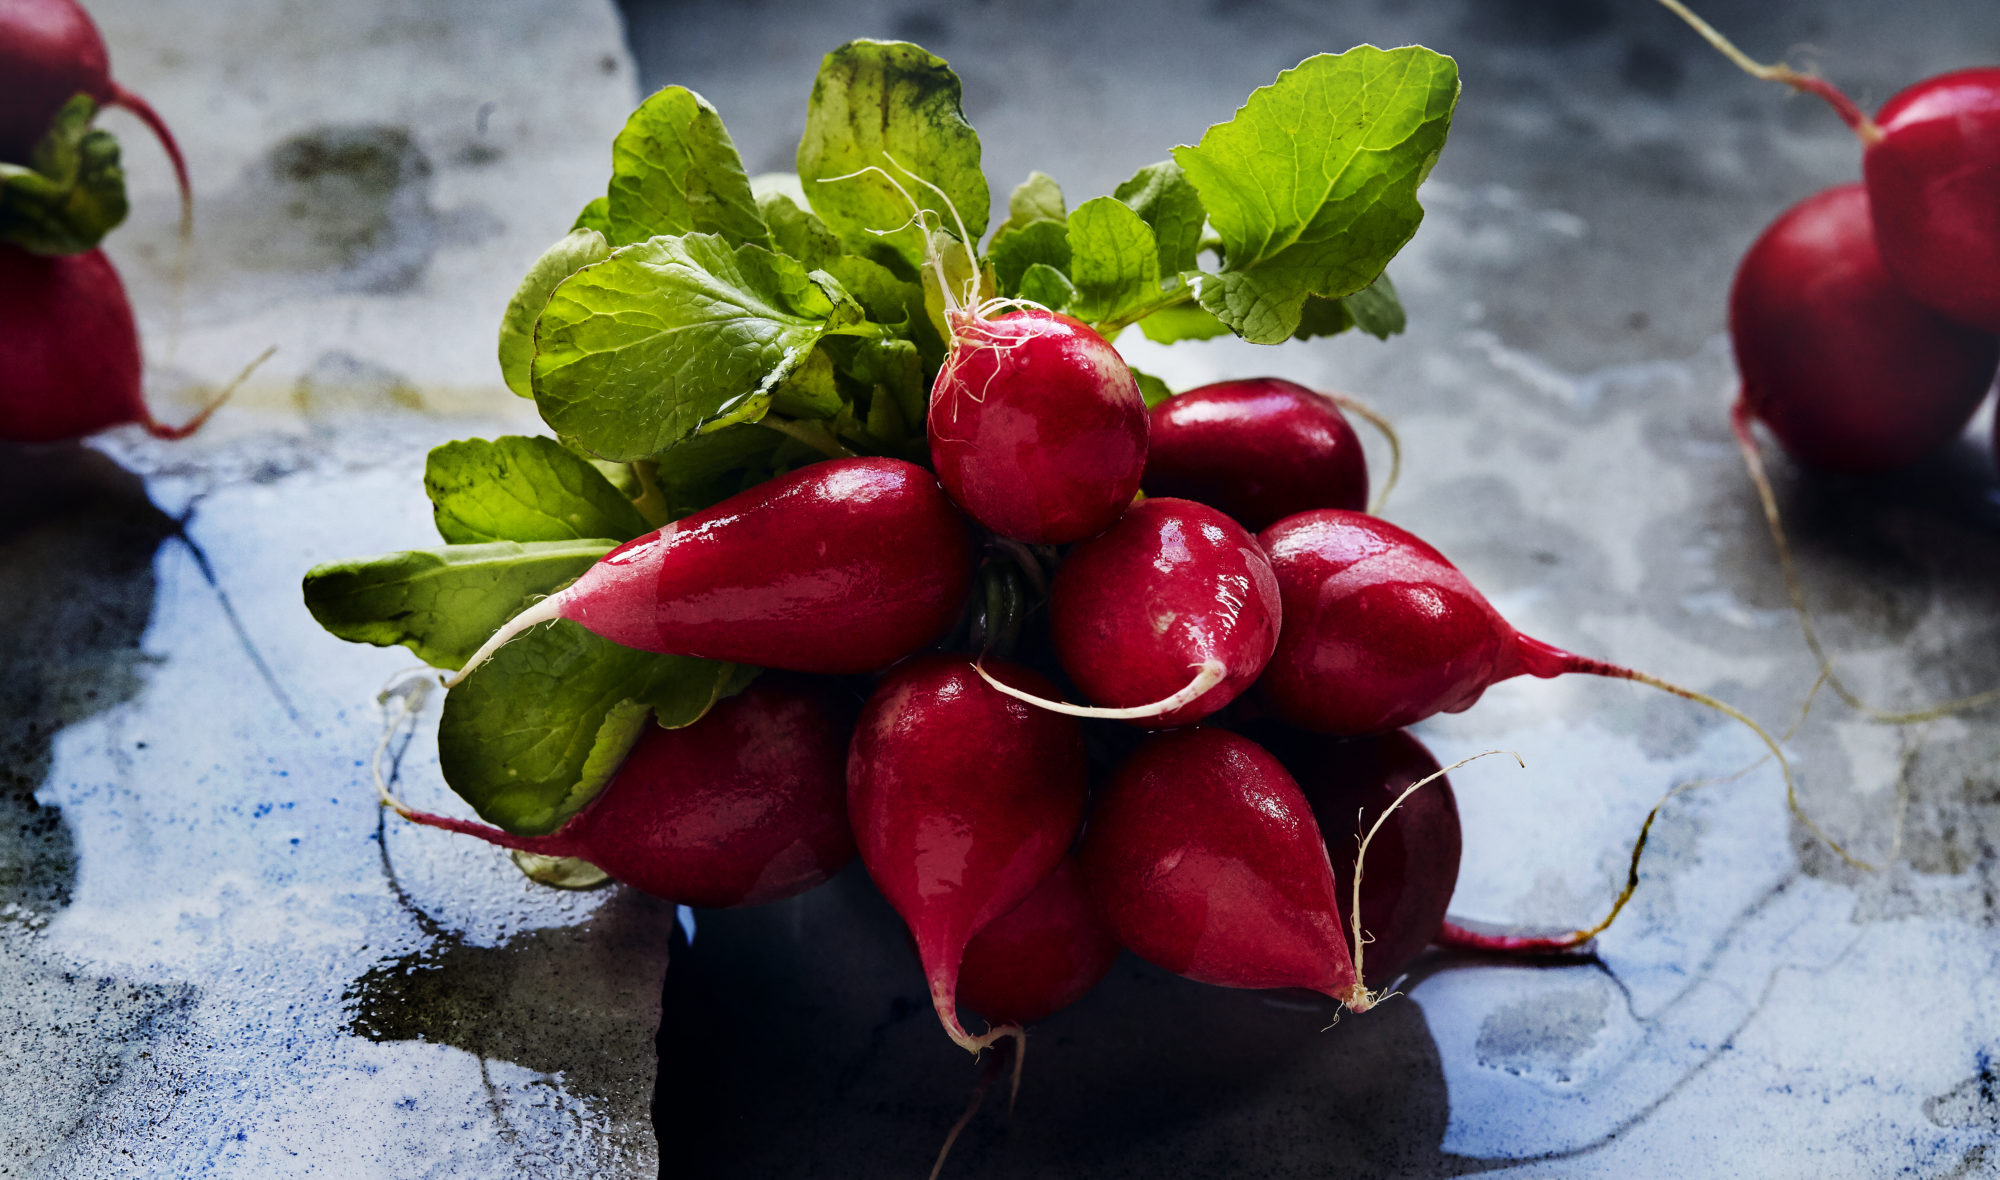 Radishes Recipe & Nutrition | Precision Nutrition's Encyclopedia of Food